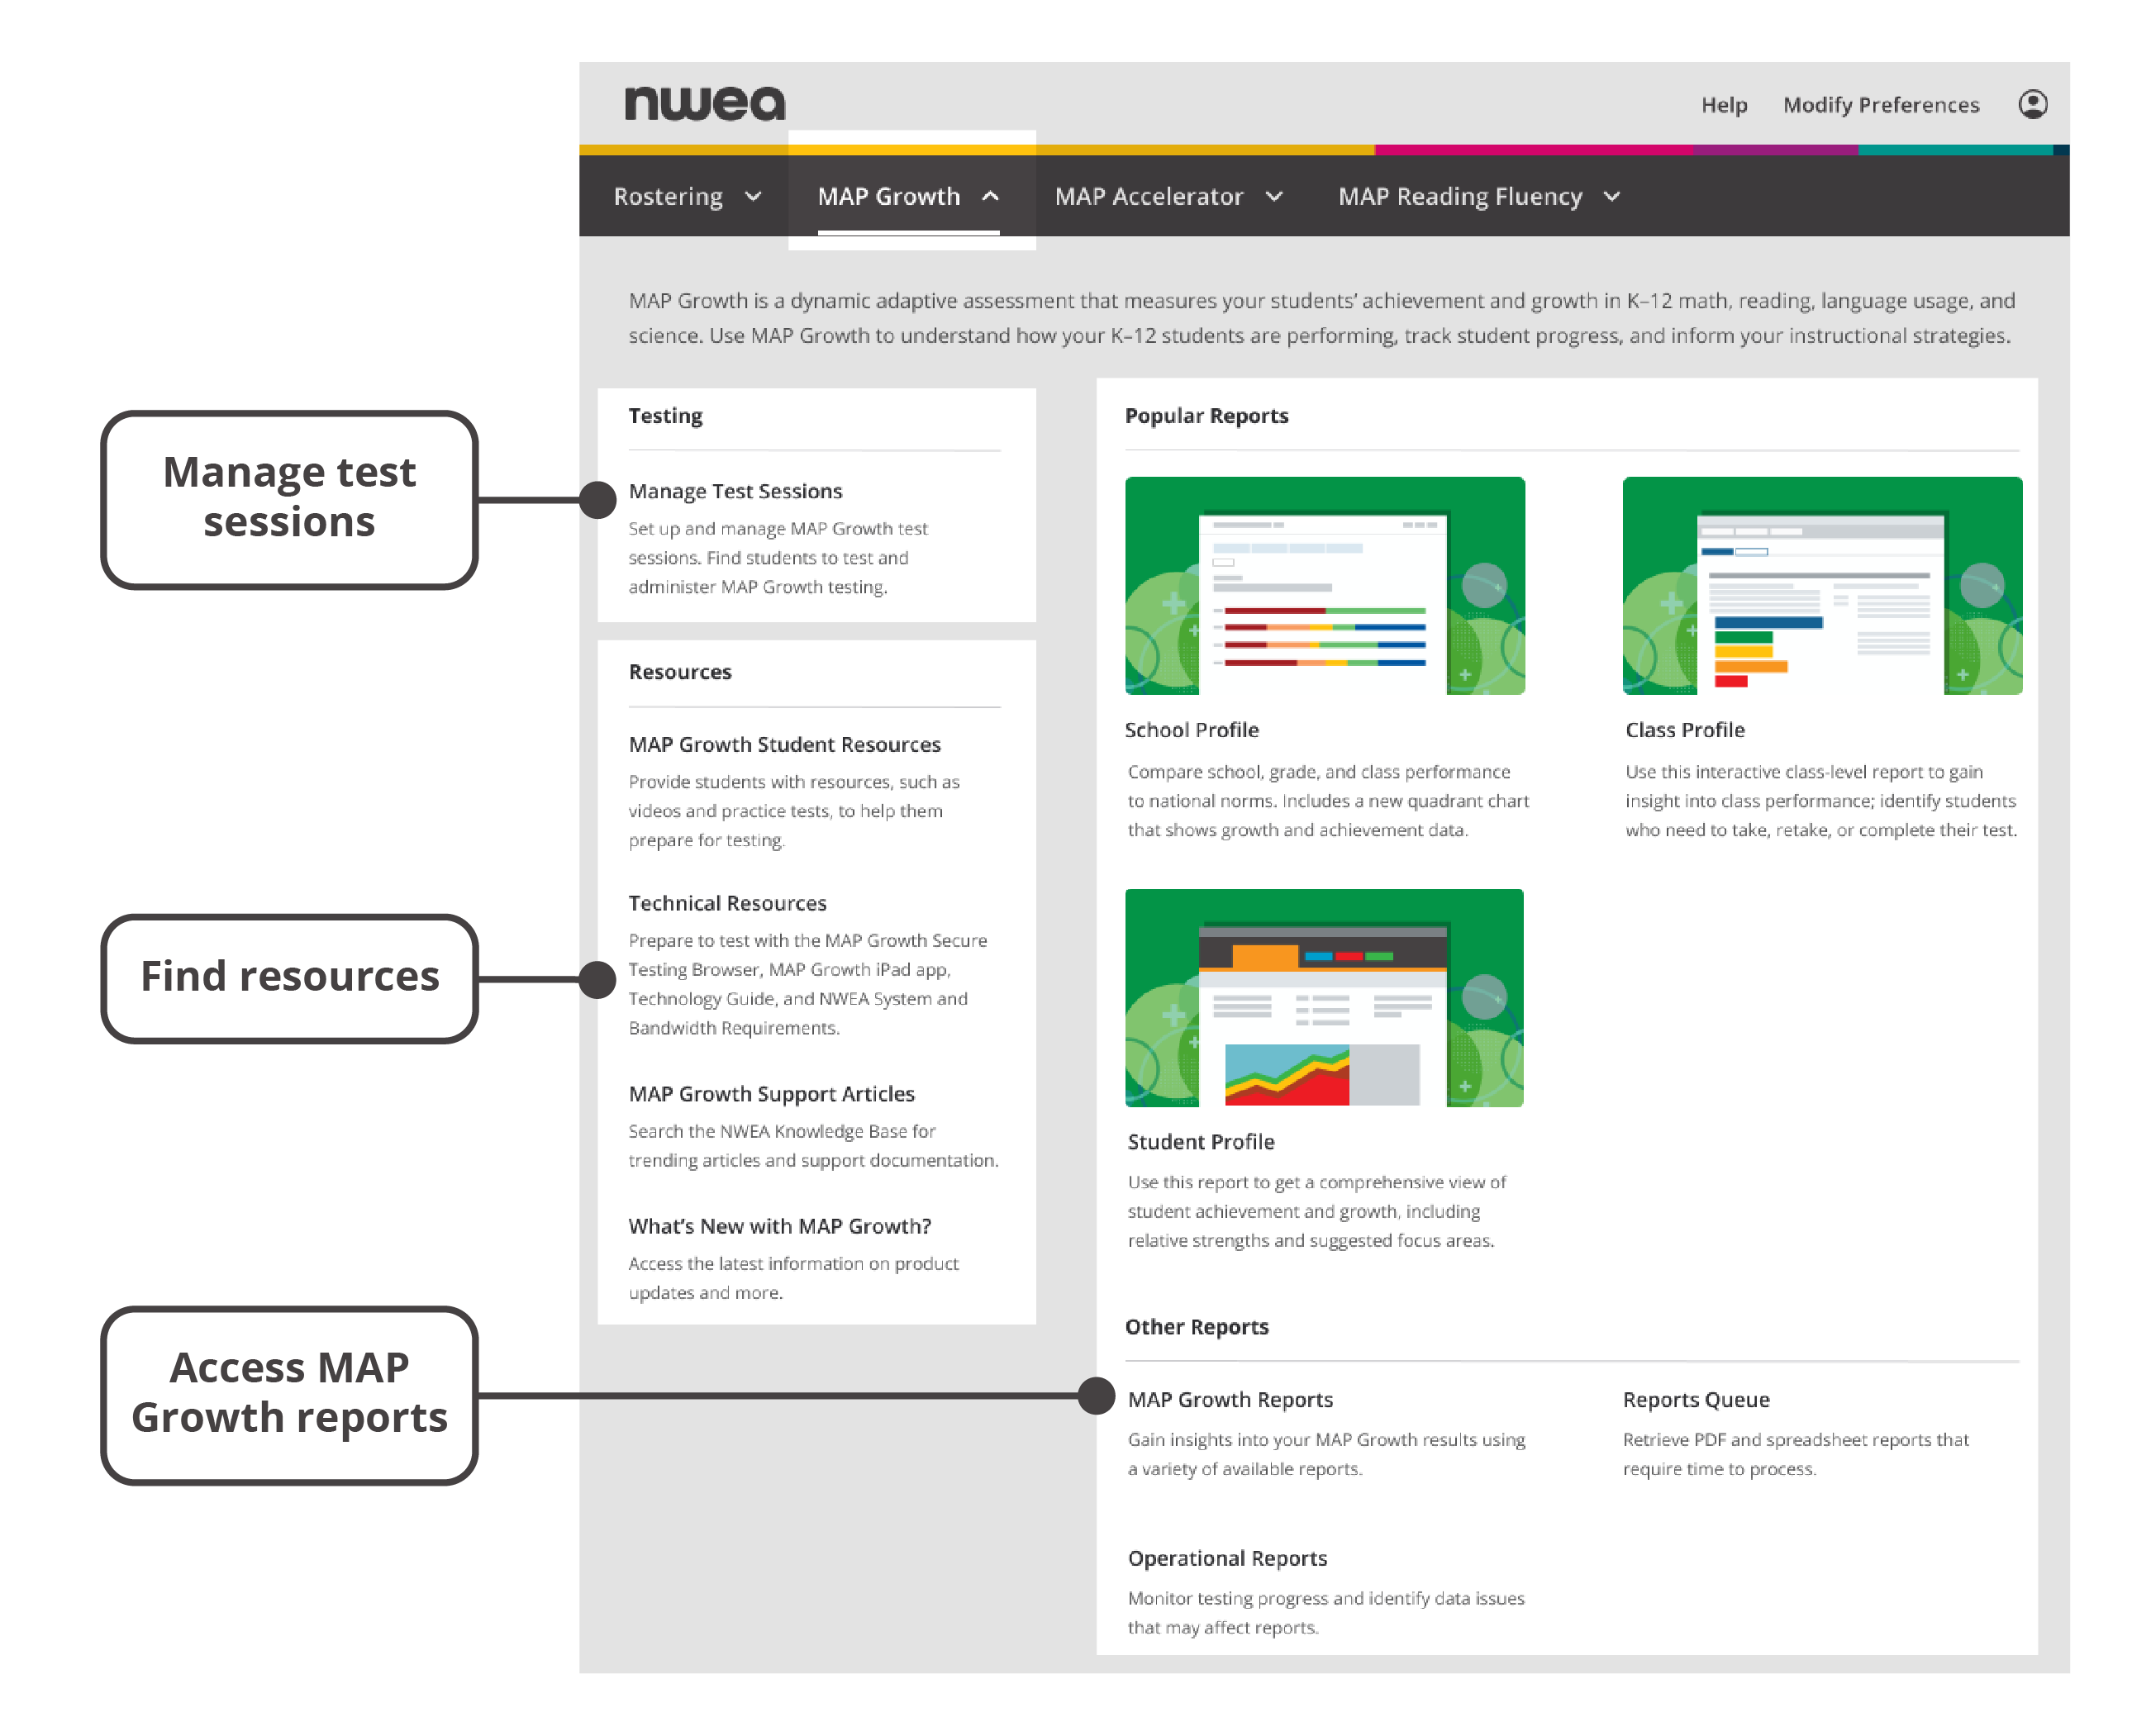 You’ll be able to manage test sessions, find resources, and access MAP Growth reports.